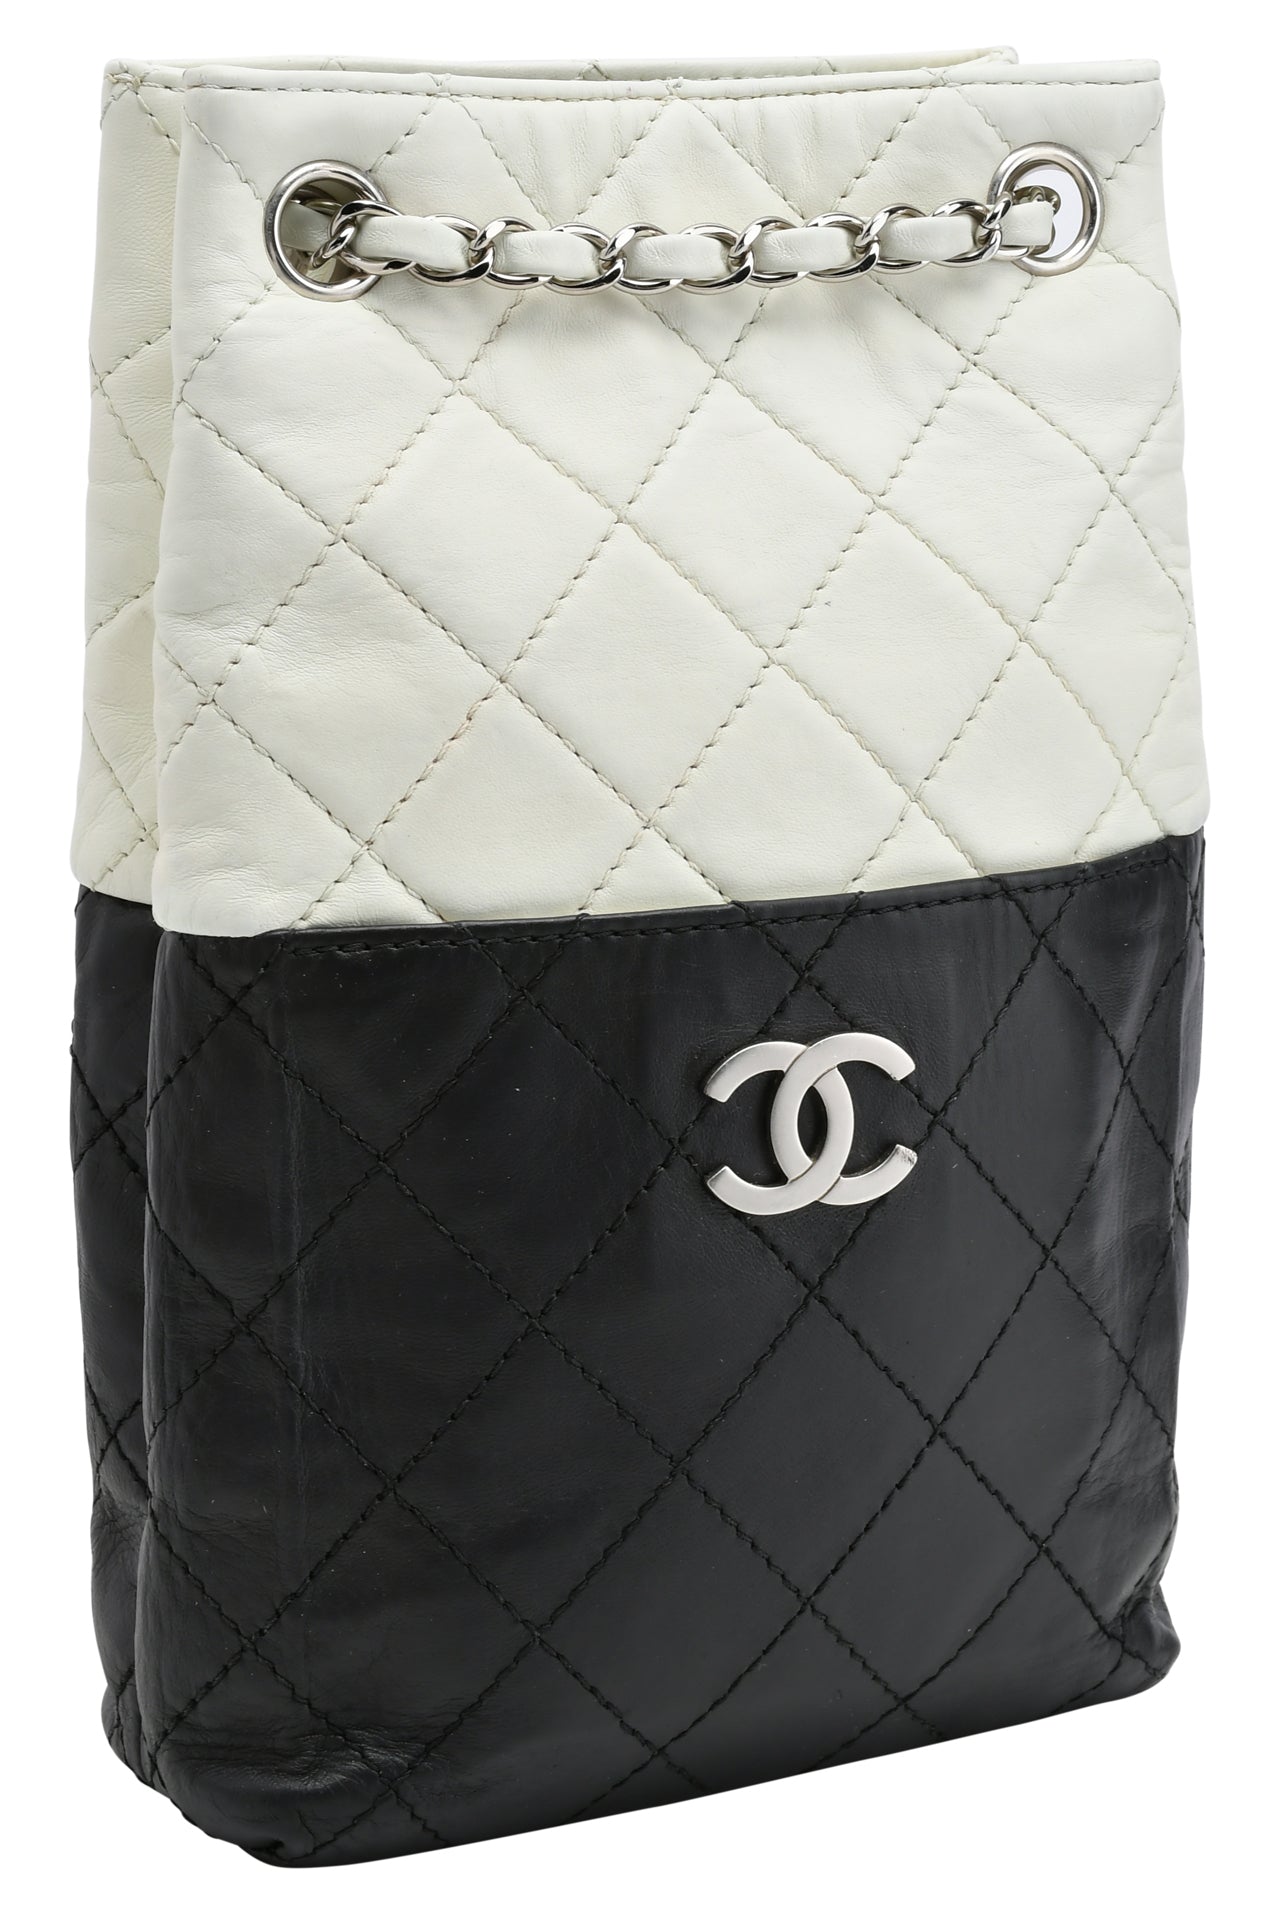 Chanel Black and White Lambskin Small Shopping Tote